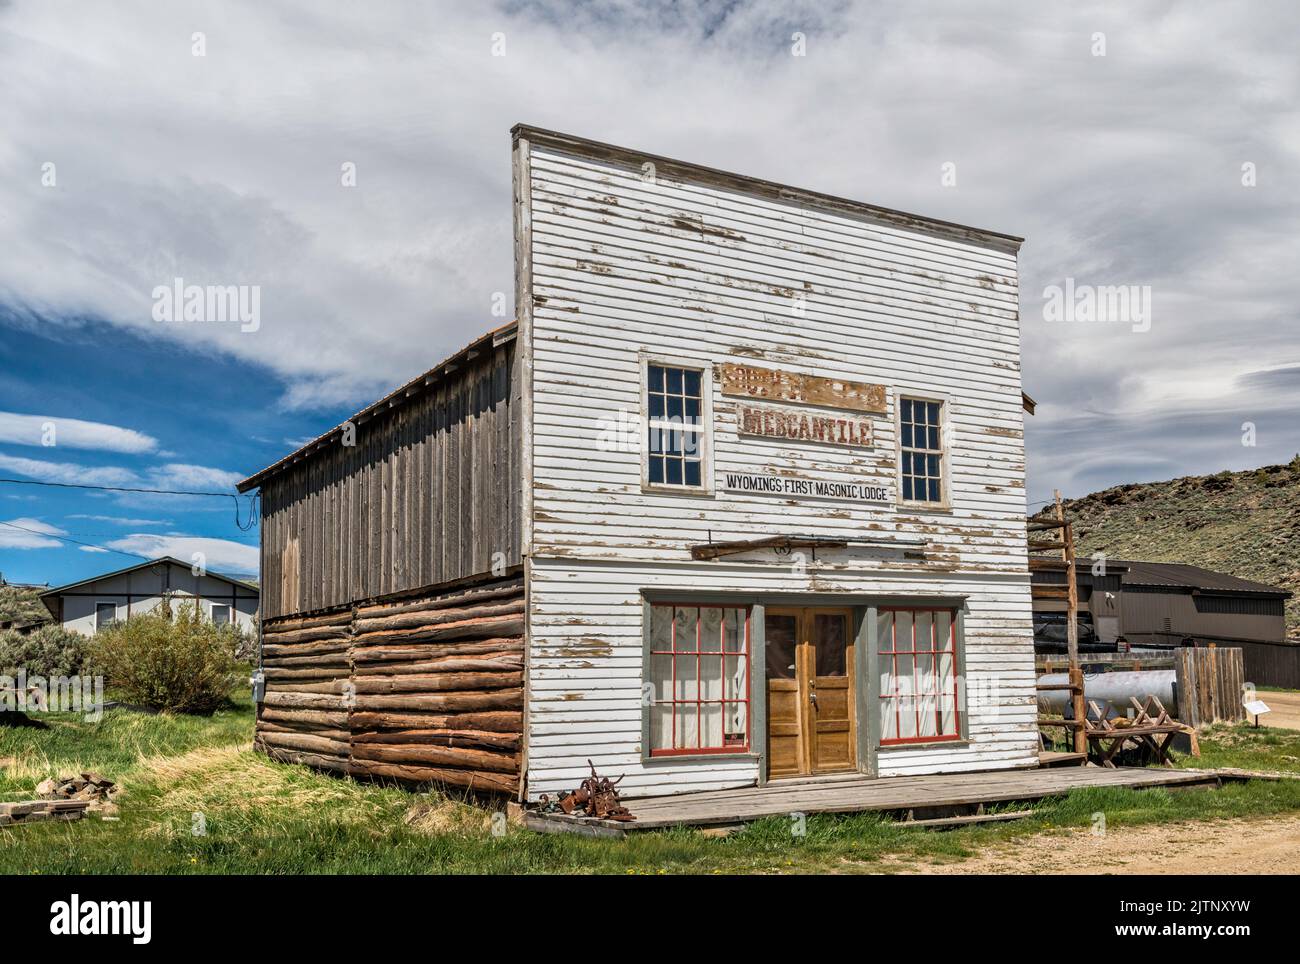 South Pass City Mercantile, Wyoming's first Masonic Lodge, in South Pass City, Wind River Range, Wyoming, USA Stock Photo